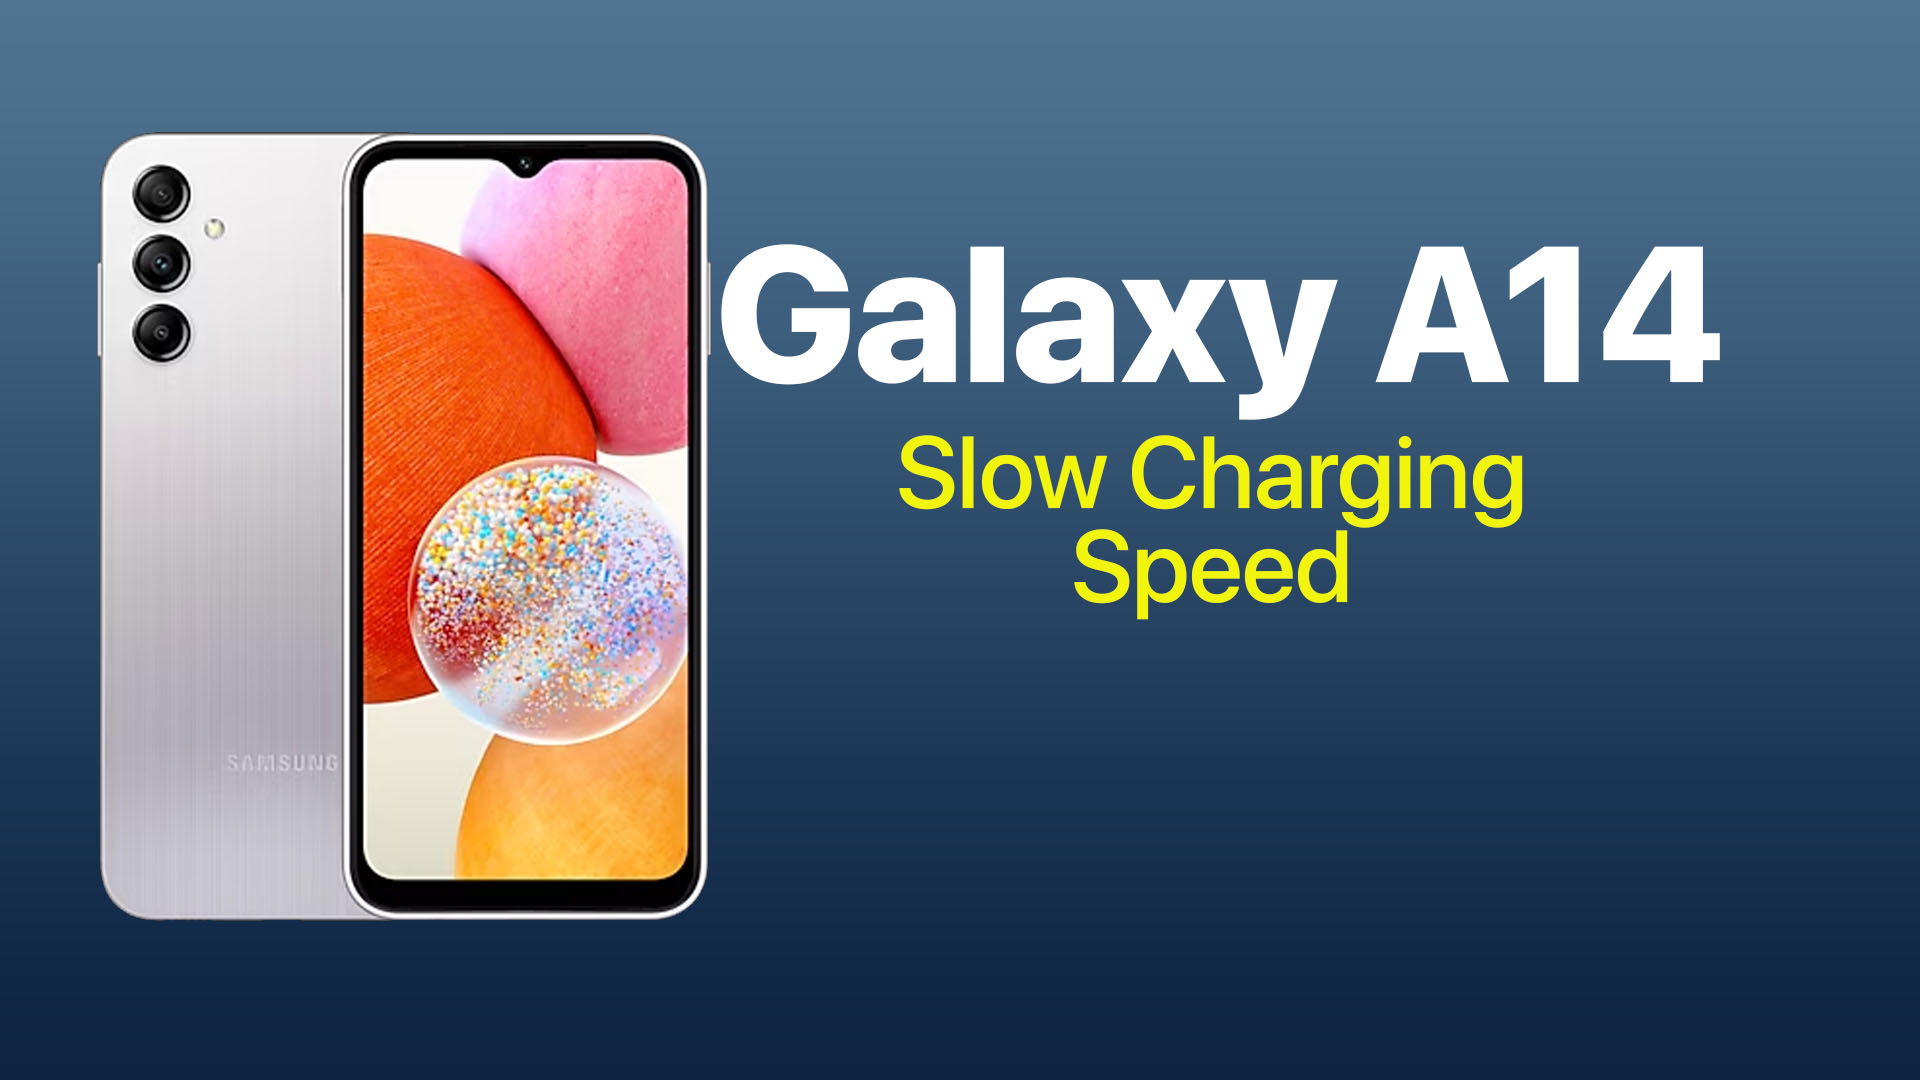 How to CHARGE Samsung Galaxy A14 - Don't Need to Enable Fast